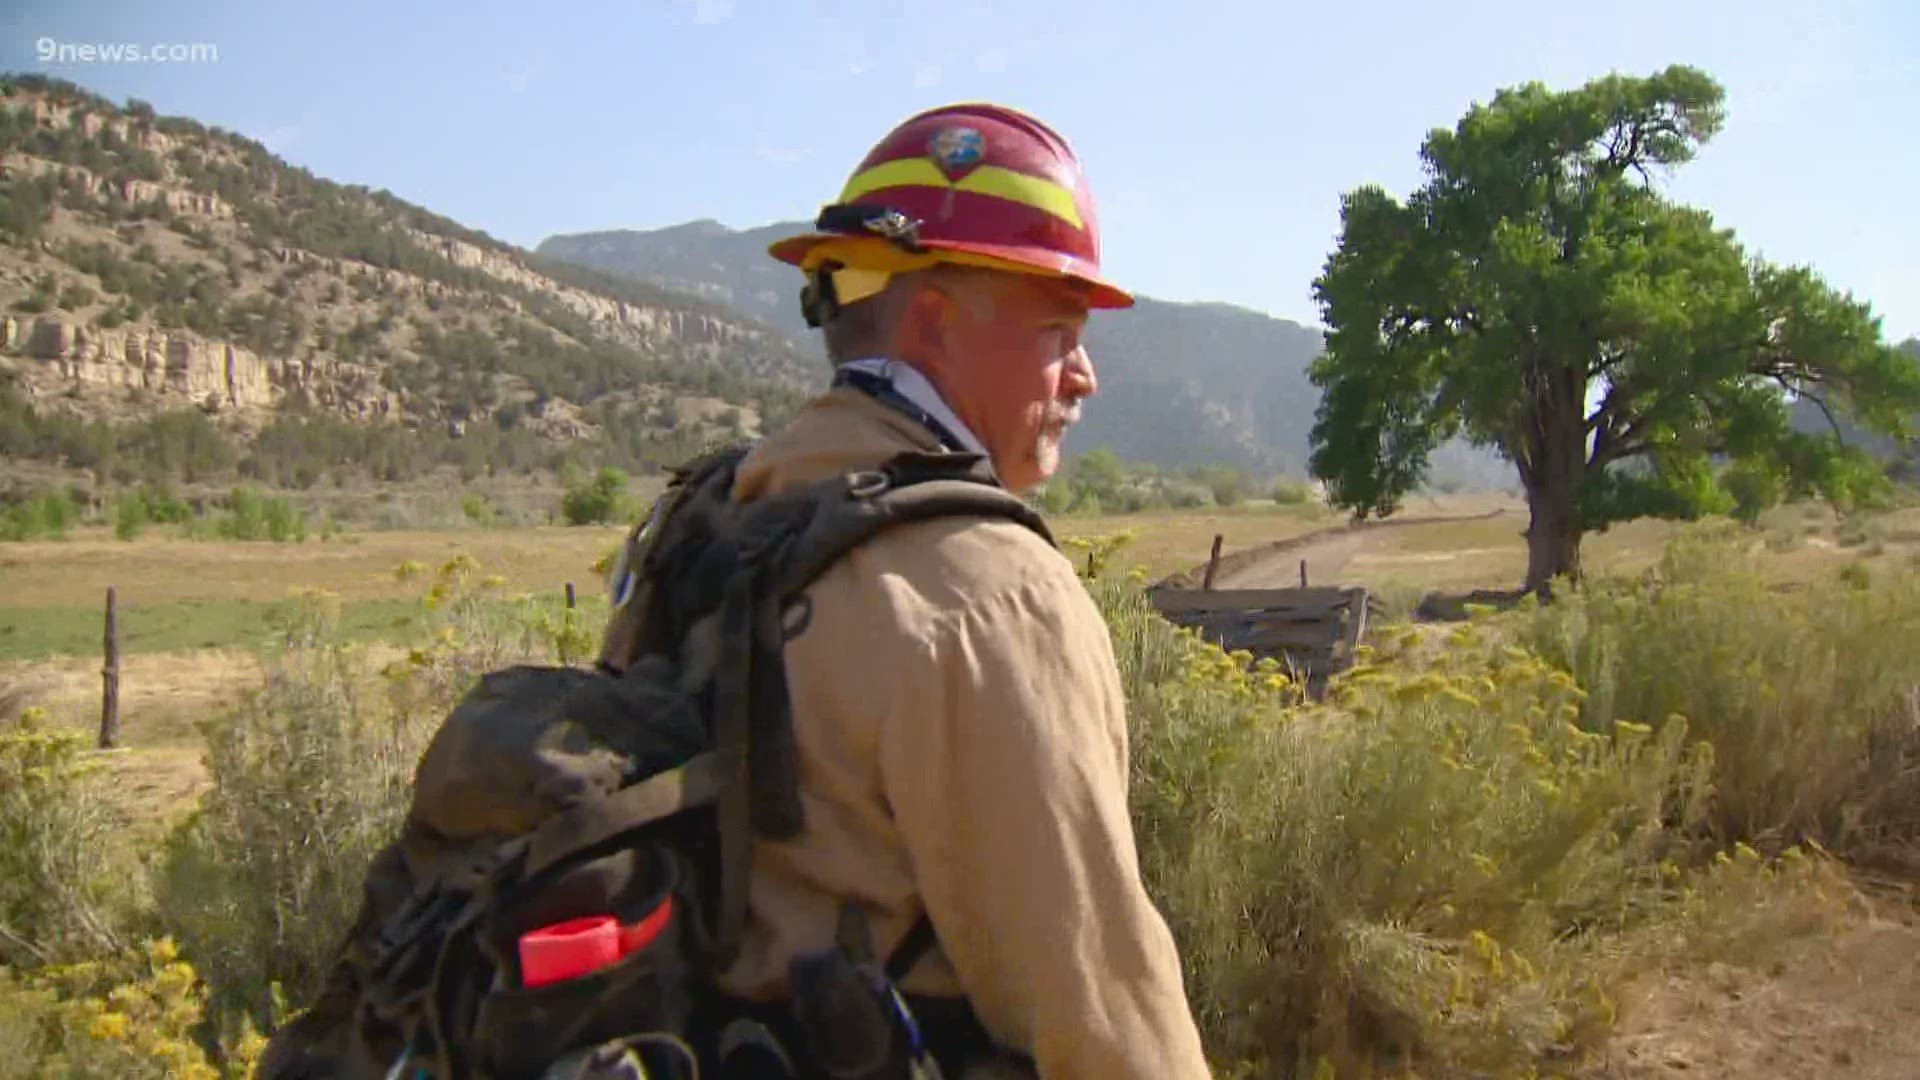 Taylor Stephens is a lieutenant with South Metro Fire Rescue. He's been fighting fires for more than three decades.